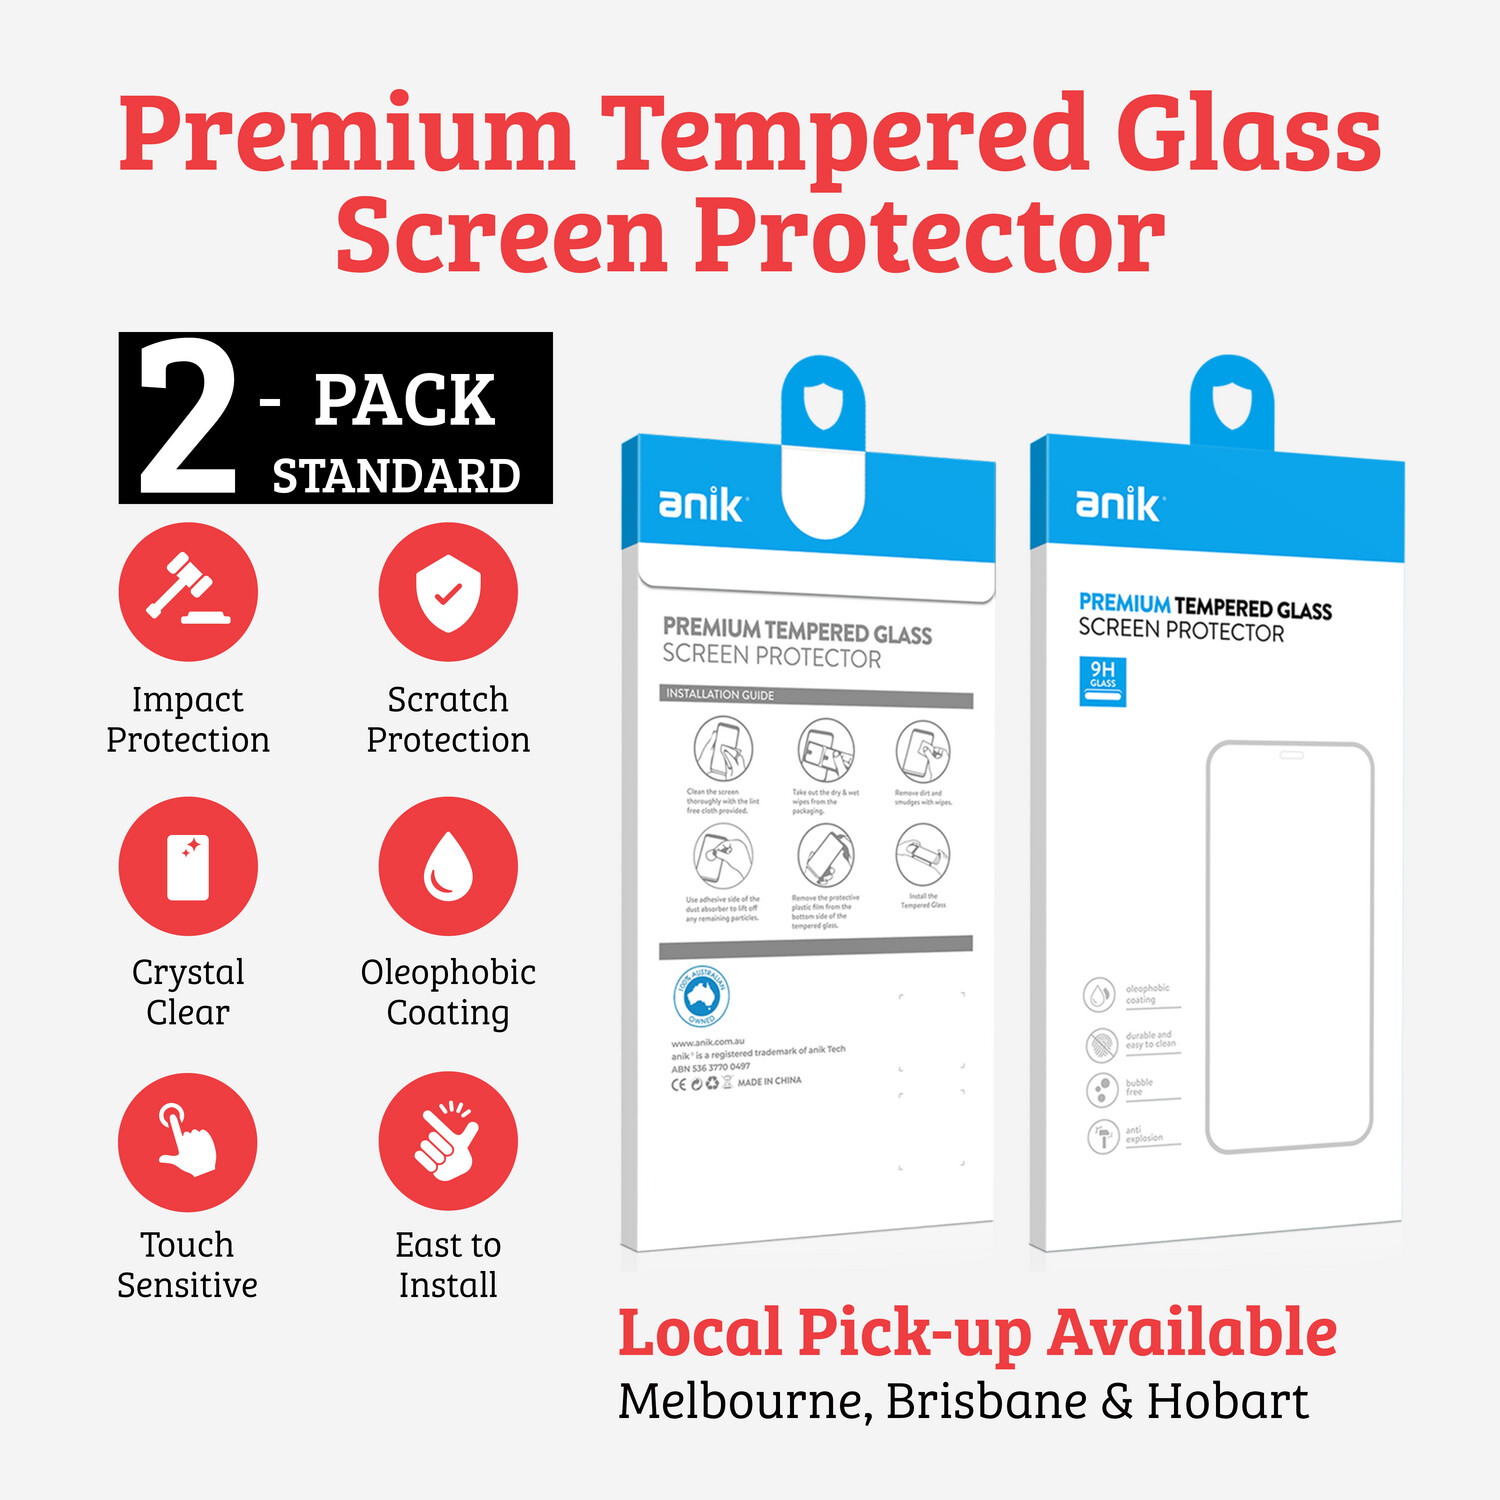 ANIK Premium Standard Tempered Glass Screen Protector for iPhone 8 [2 Pack]